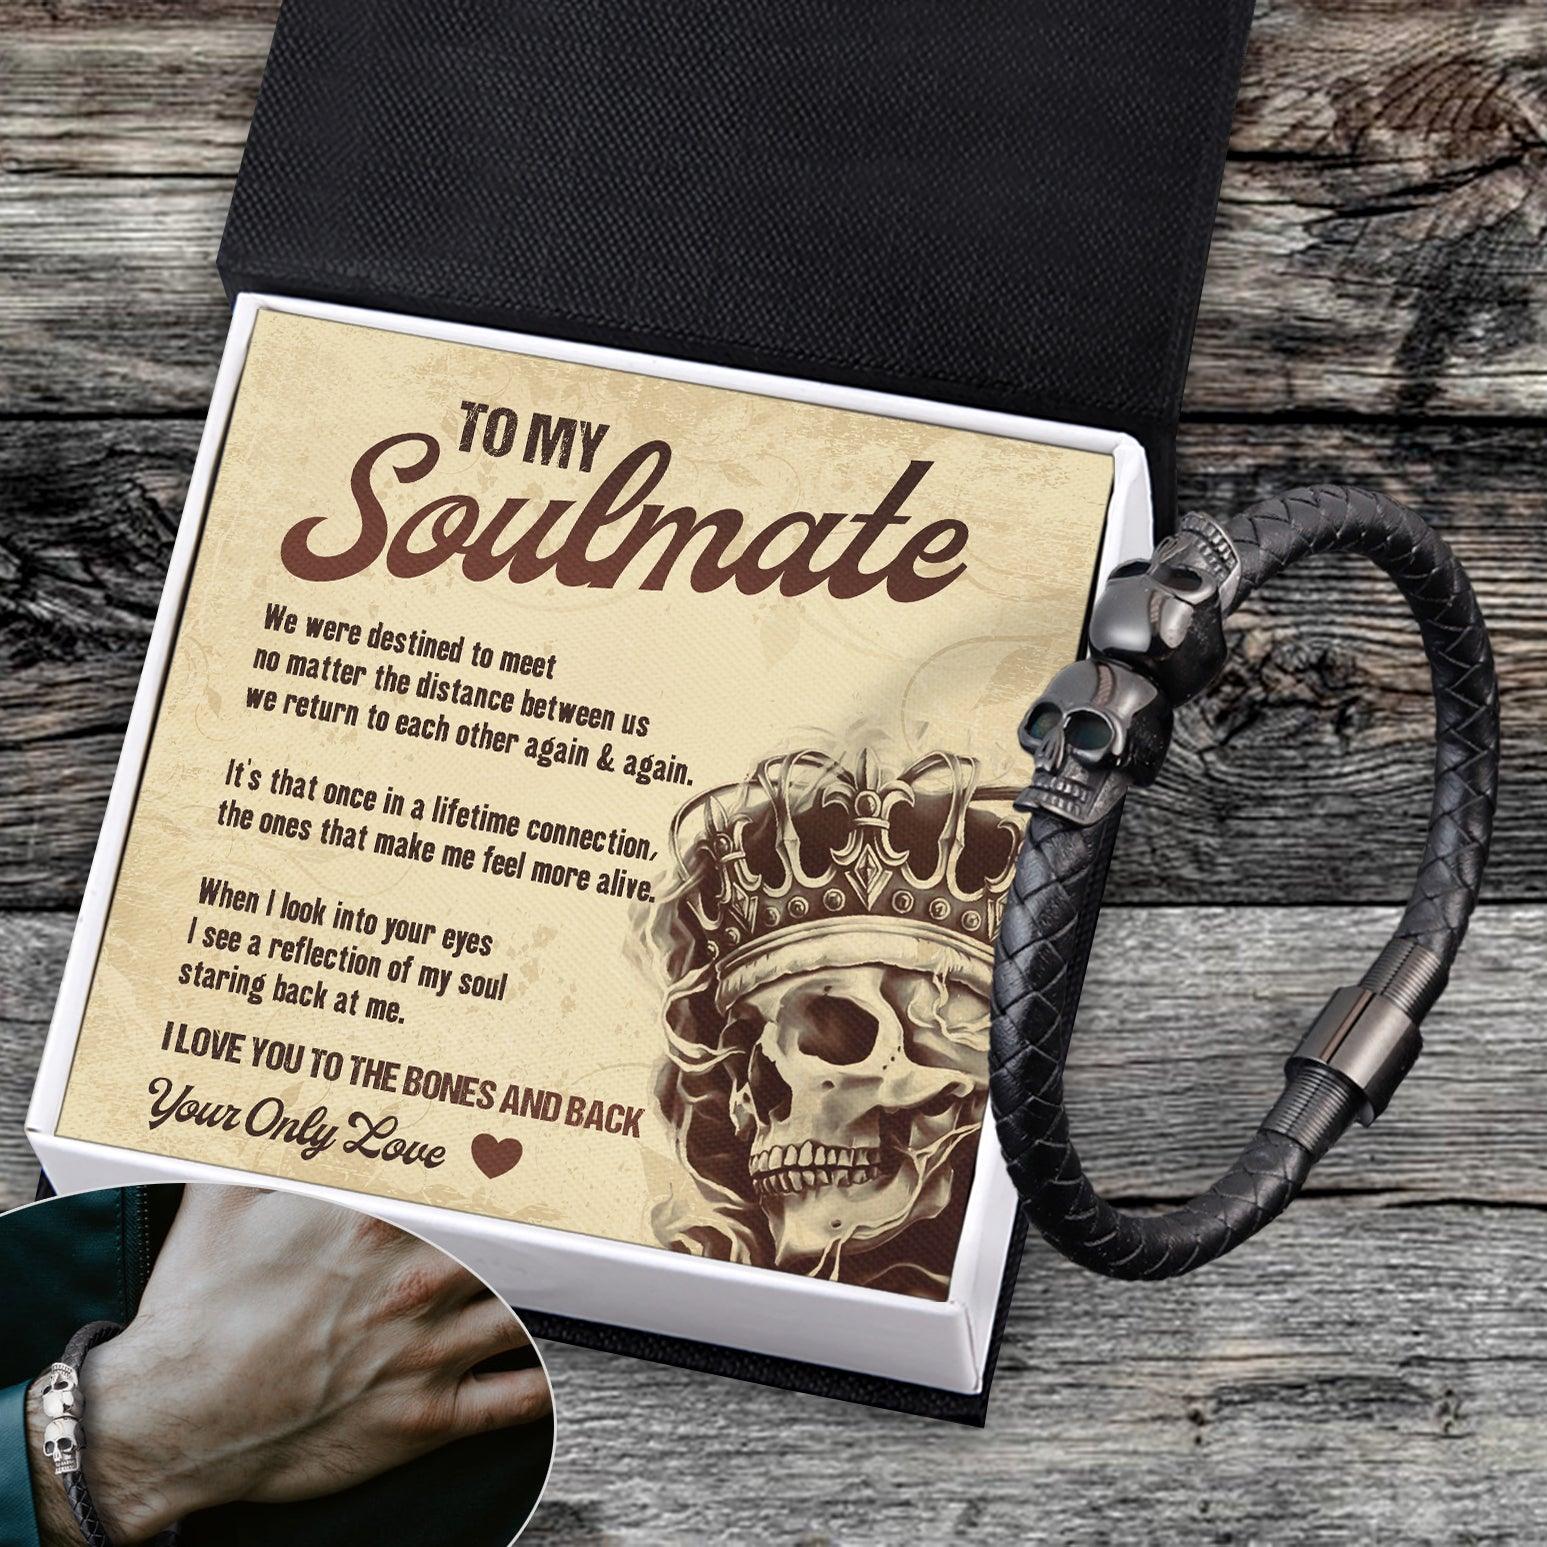 Skull Cuff Bracelet - Skull - To My Soulmate - When I Look Into Your Eye - Augbbh26023 - Gifts Holder